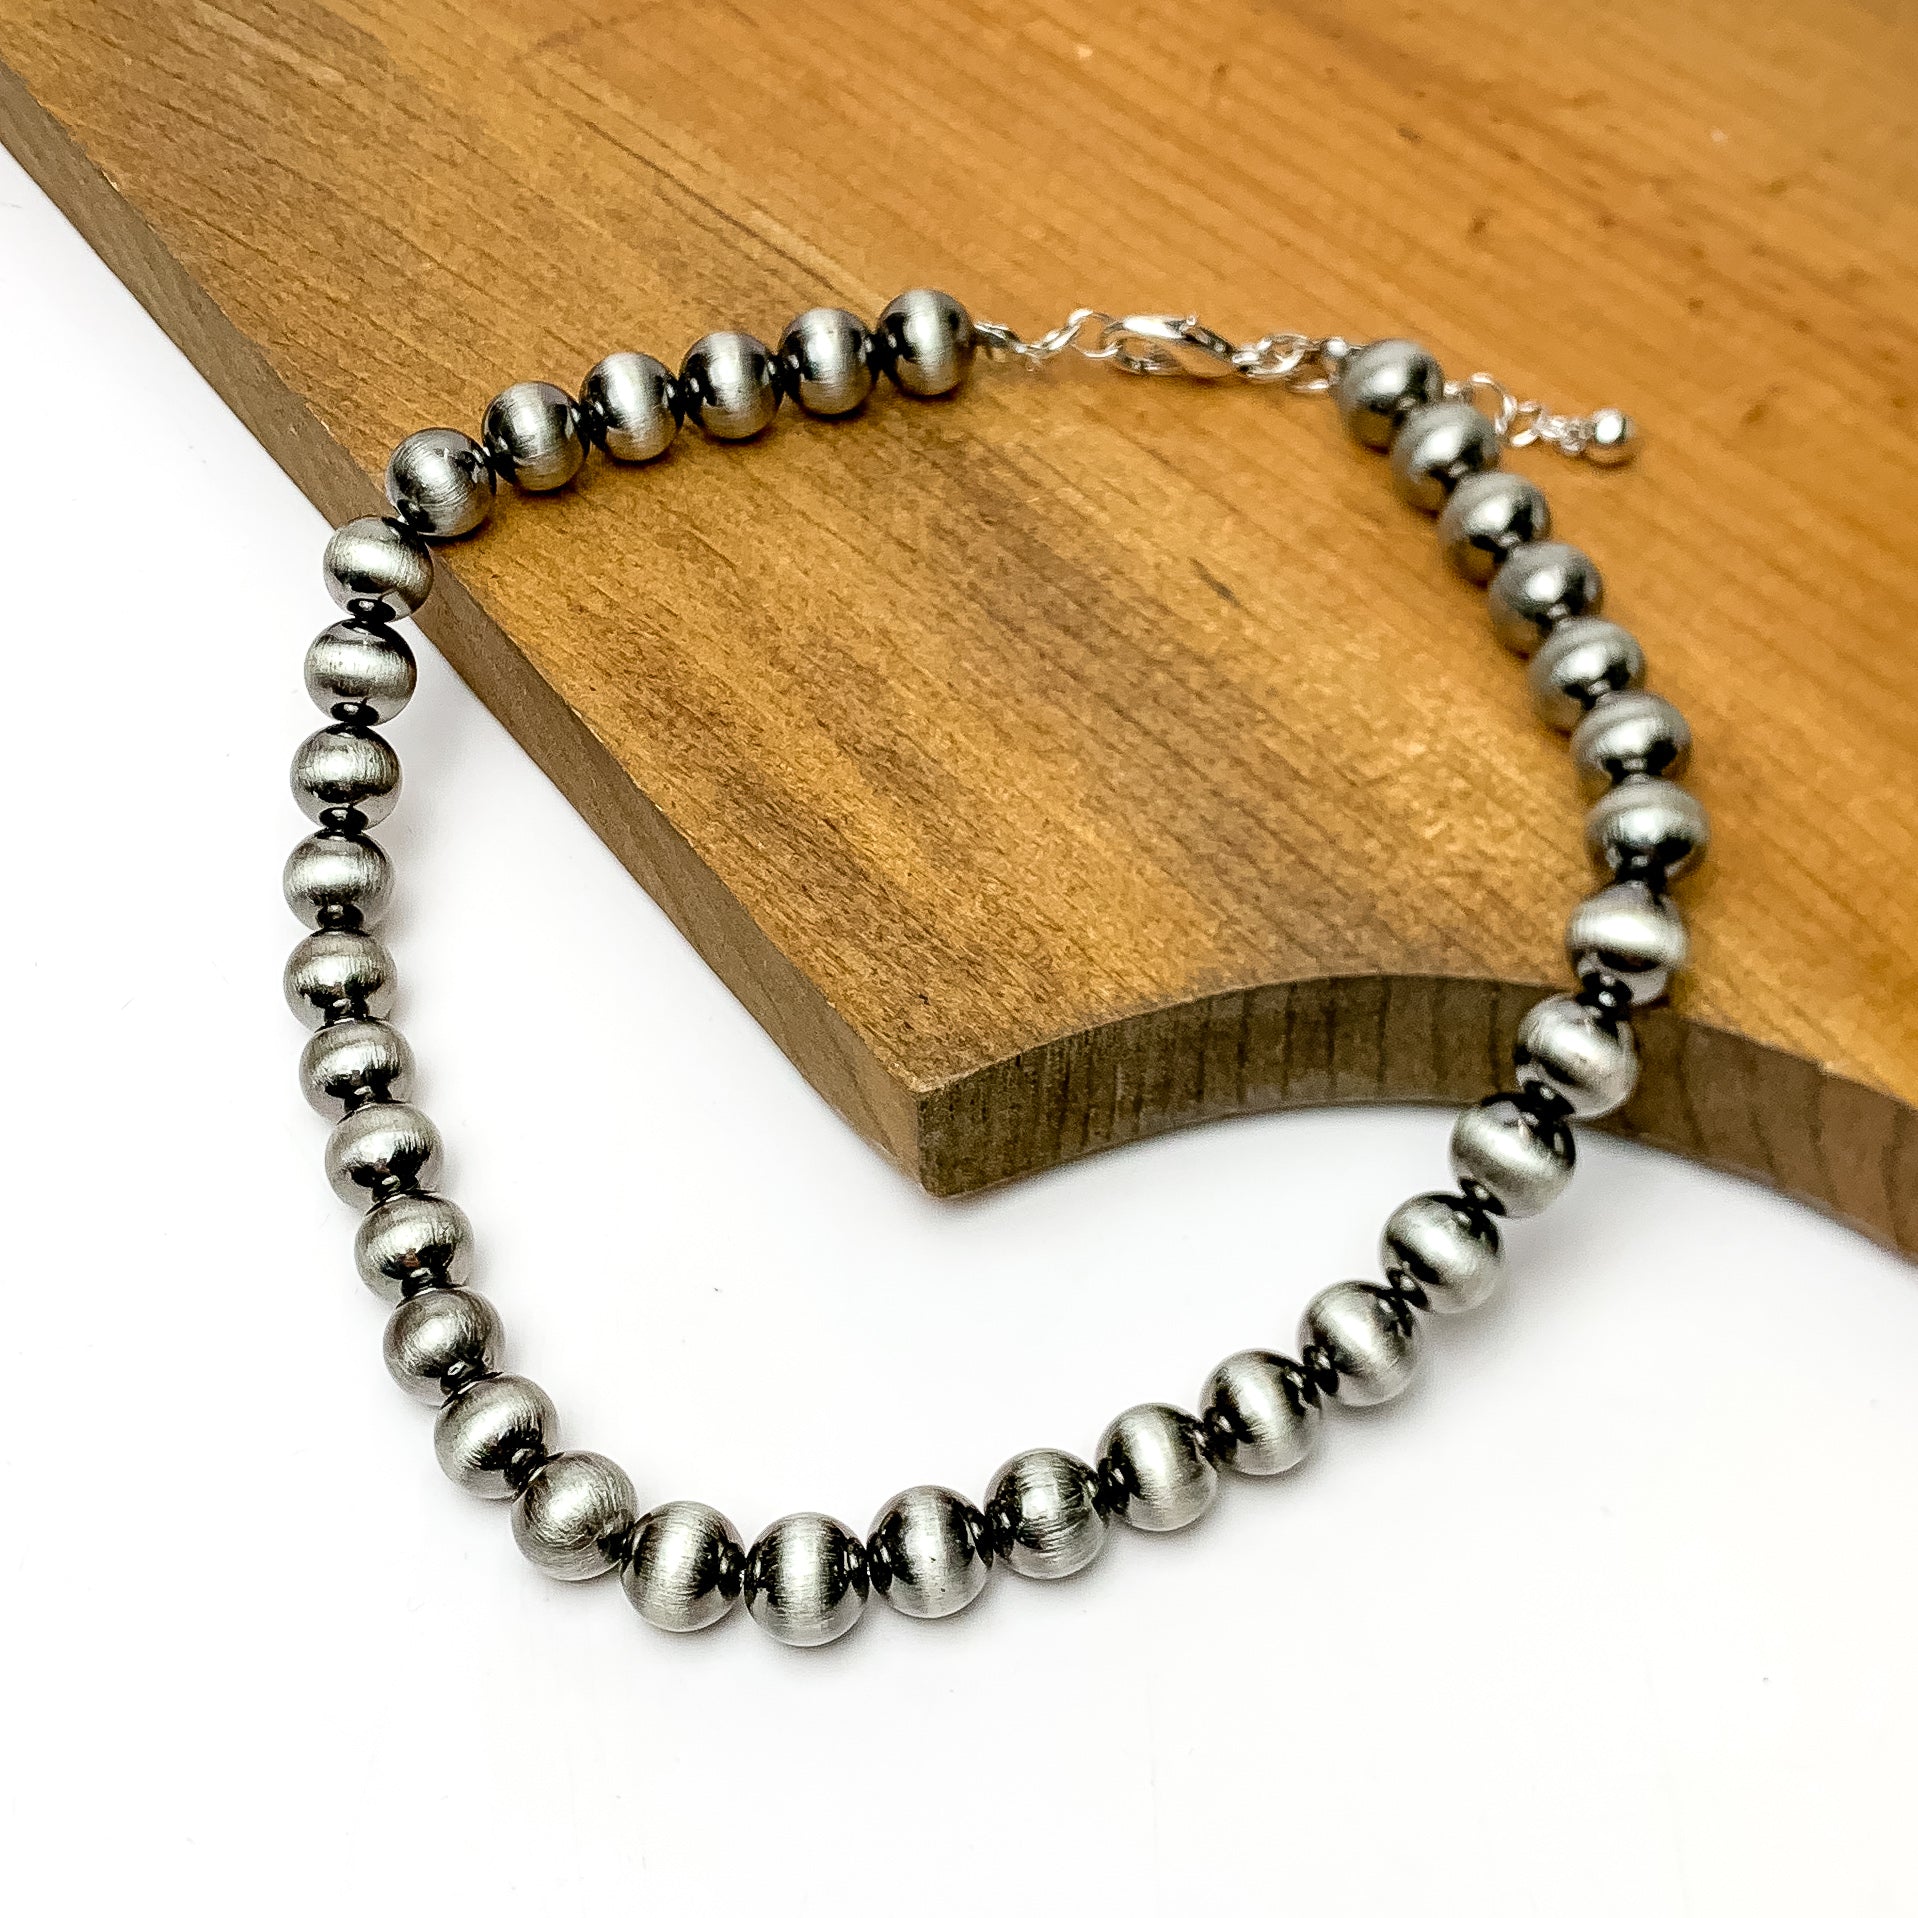 Small Faux Navajo Pearls Necklace in Silver Tone. This necklace is pictured on a wood piece with a white background.